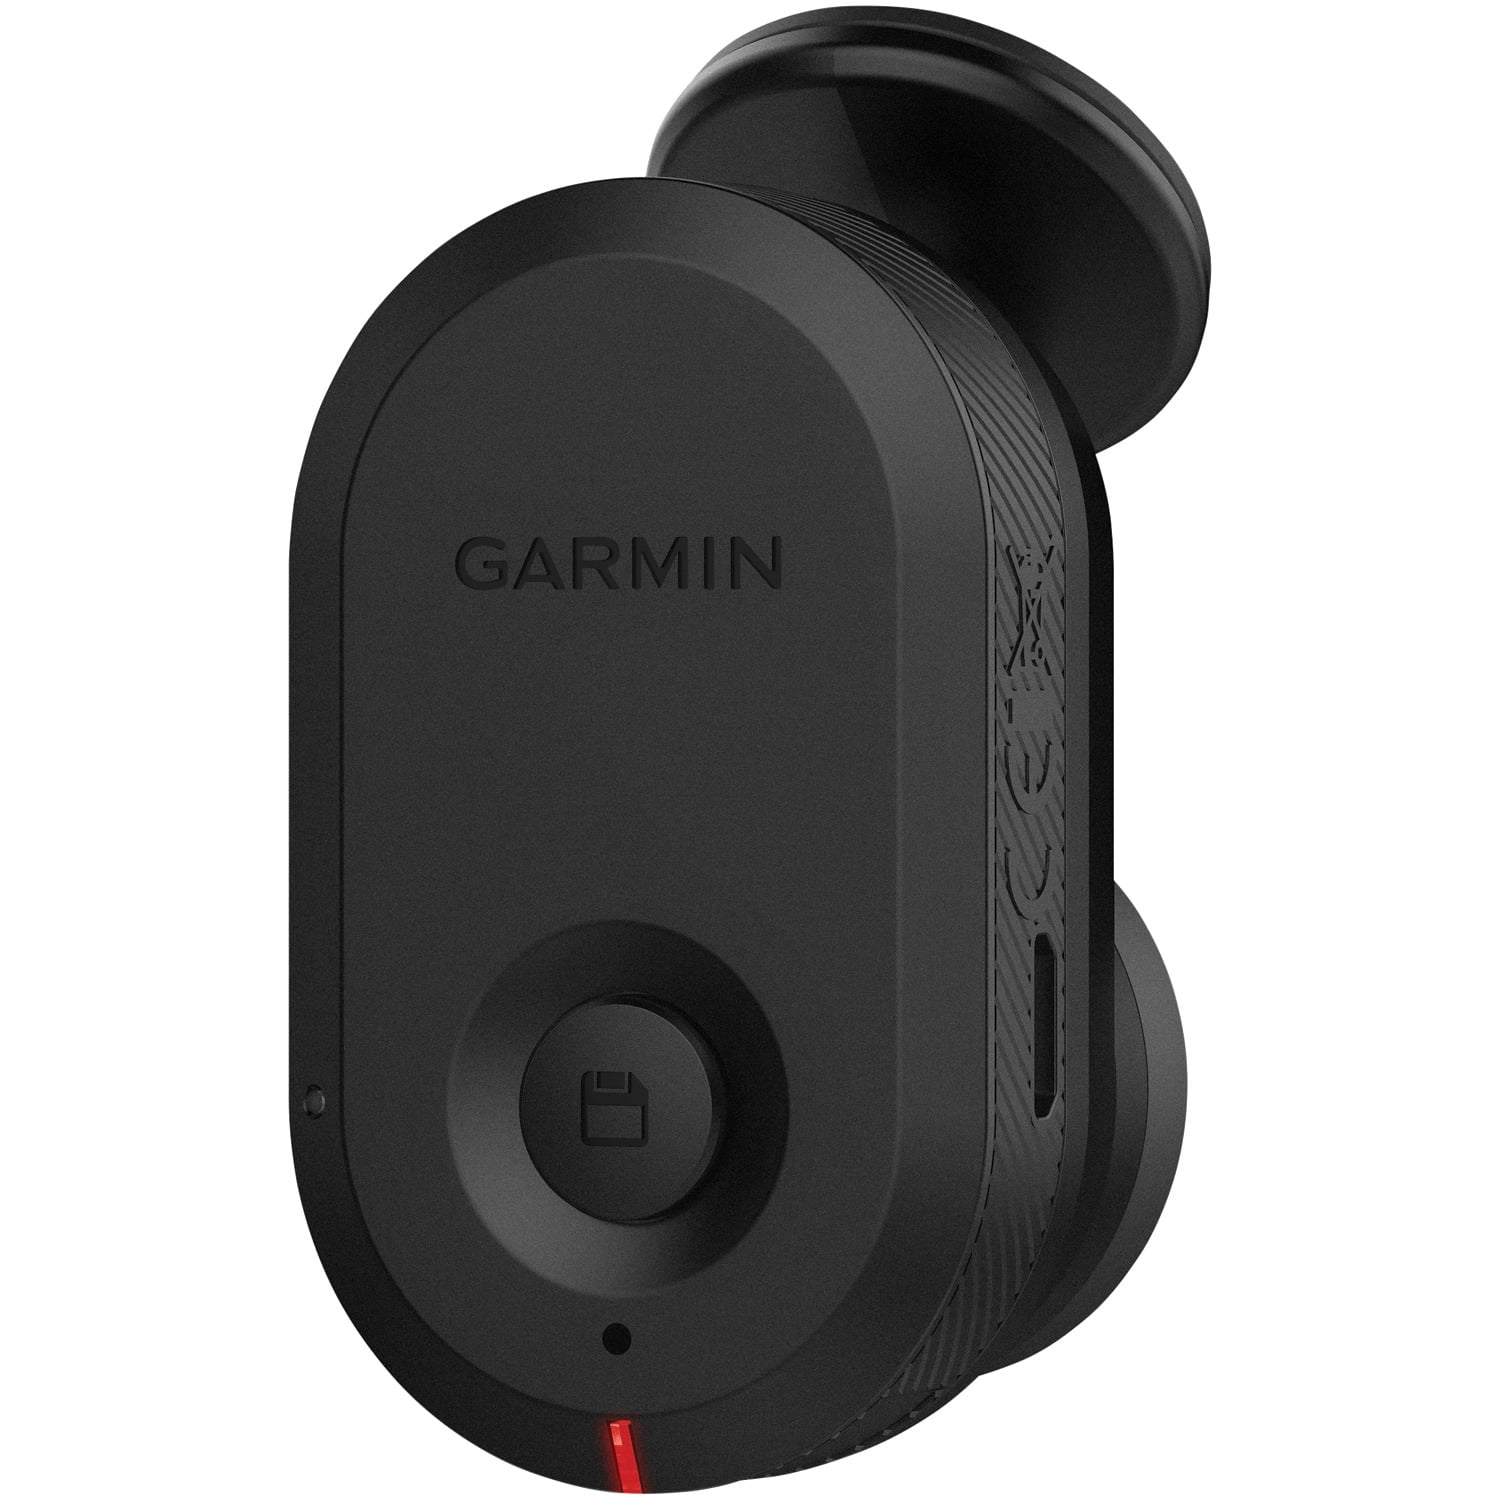 Garmin Dash Cam Mini review: Tiny and easy, with surprisingly good